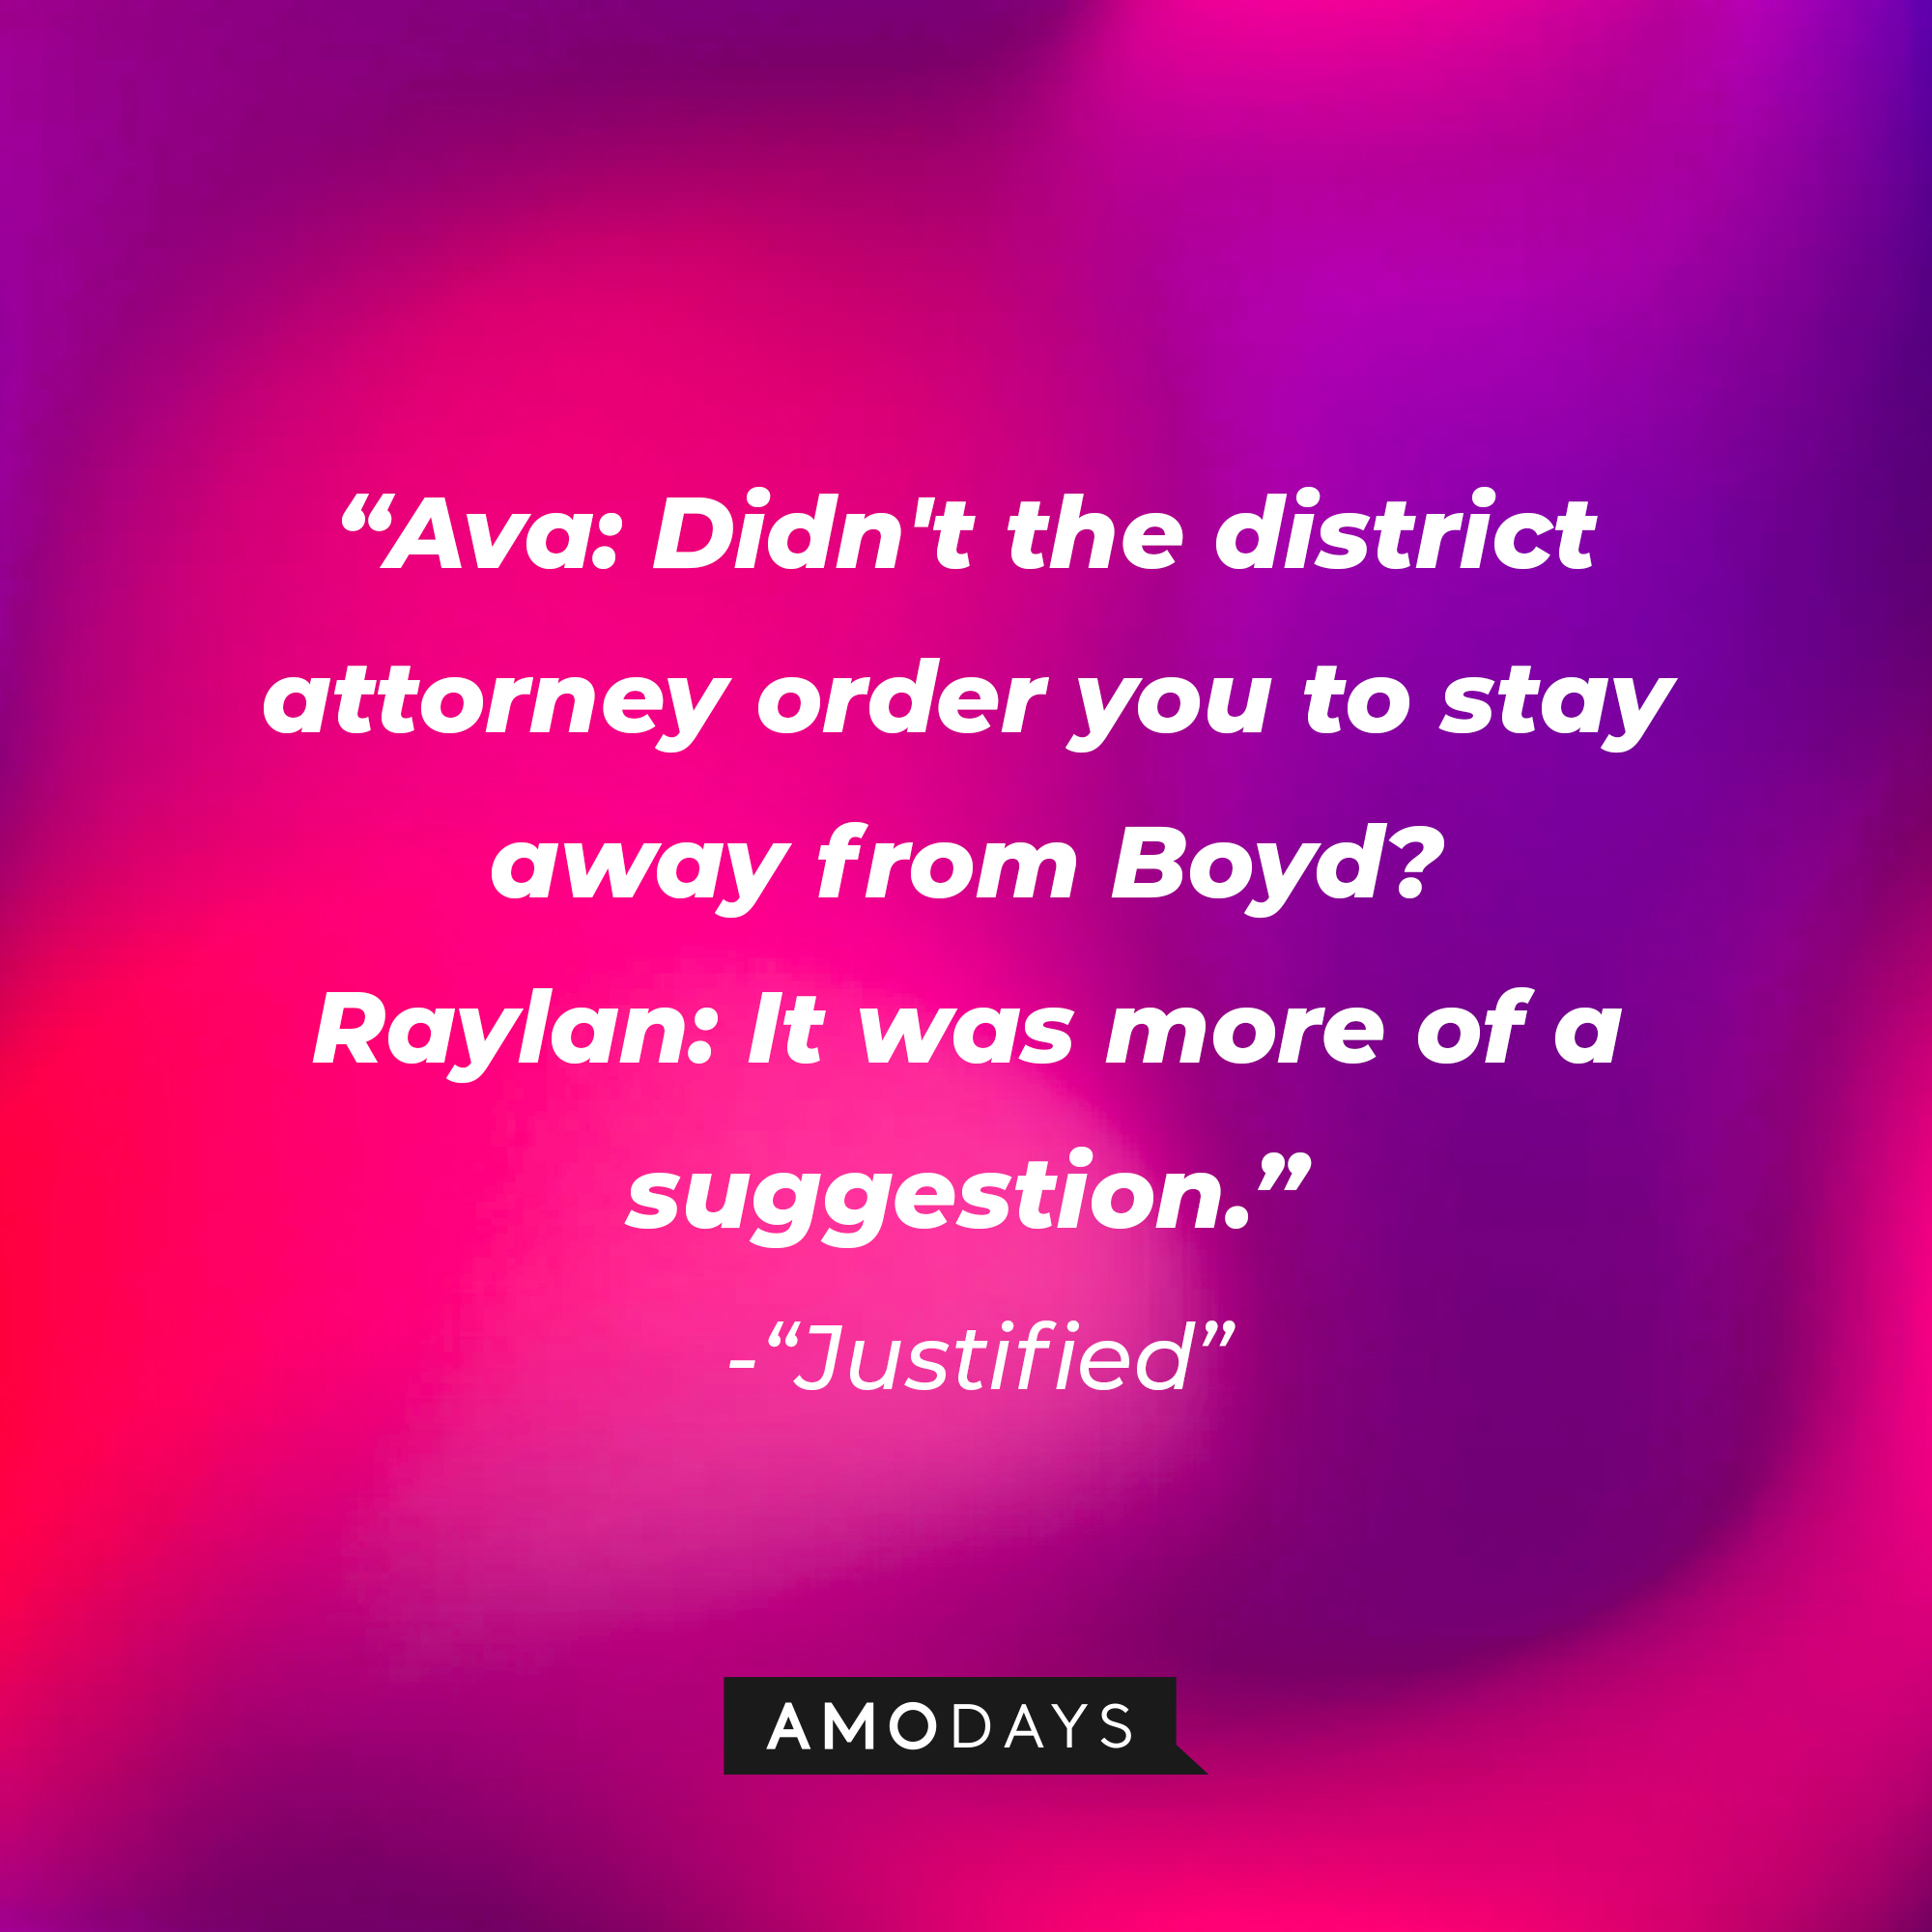 Quote from “Justified”: “Ava: Didn't the district attorney order you to stay away from Boyd? Raylan: It was more of a suggestion.” | Source: AmoDays